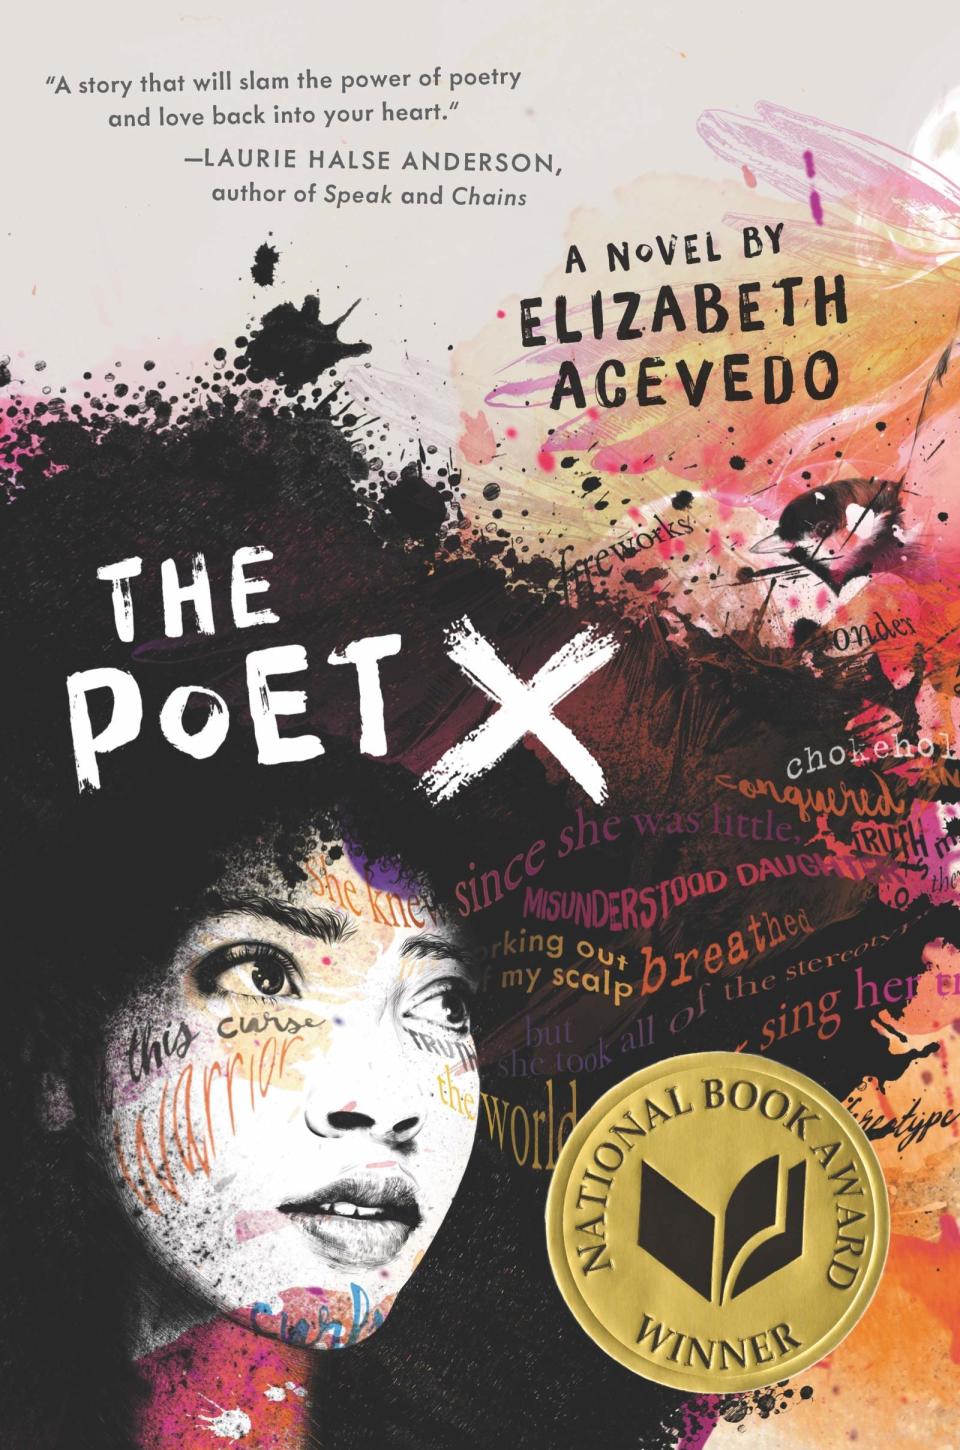 "Elizabeth Acevedo&rsquo;s debut novel, written in verse, continuously draws in its reader with sensory-igniting imagery. ... The reader walks with Xio from submission to rebellion to liberation, and as her perspective changes, so does the stanza structure to encourage appropriate pacing in the absence of performance; the pacing of words conveys the protagonist&rsquo;s mood, forcing the reader to feel as she feels and board her train of thought." -- <a href="https://ew.com/books/2018/03/14/the-poet-x-book-review/" target="_blank" rel="noopener noreferrer">Entertainment Weekly</a>